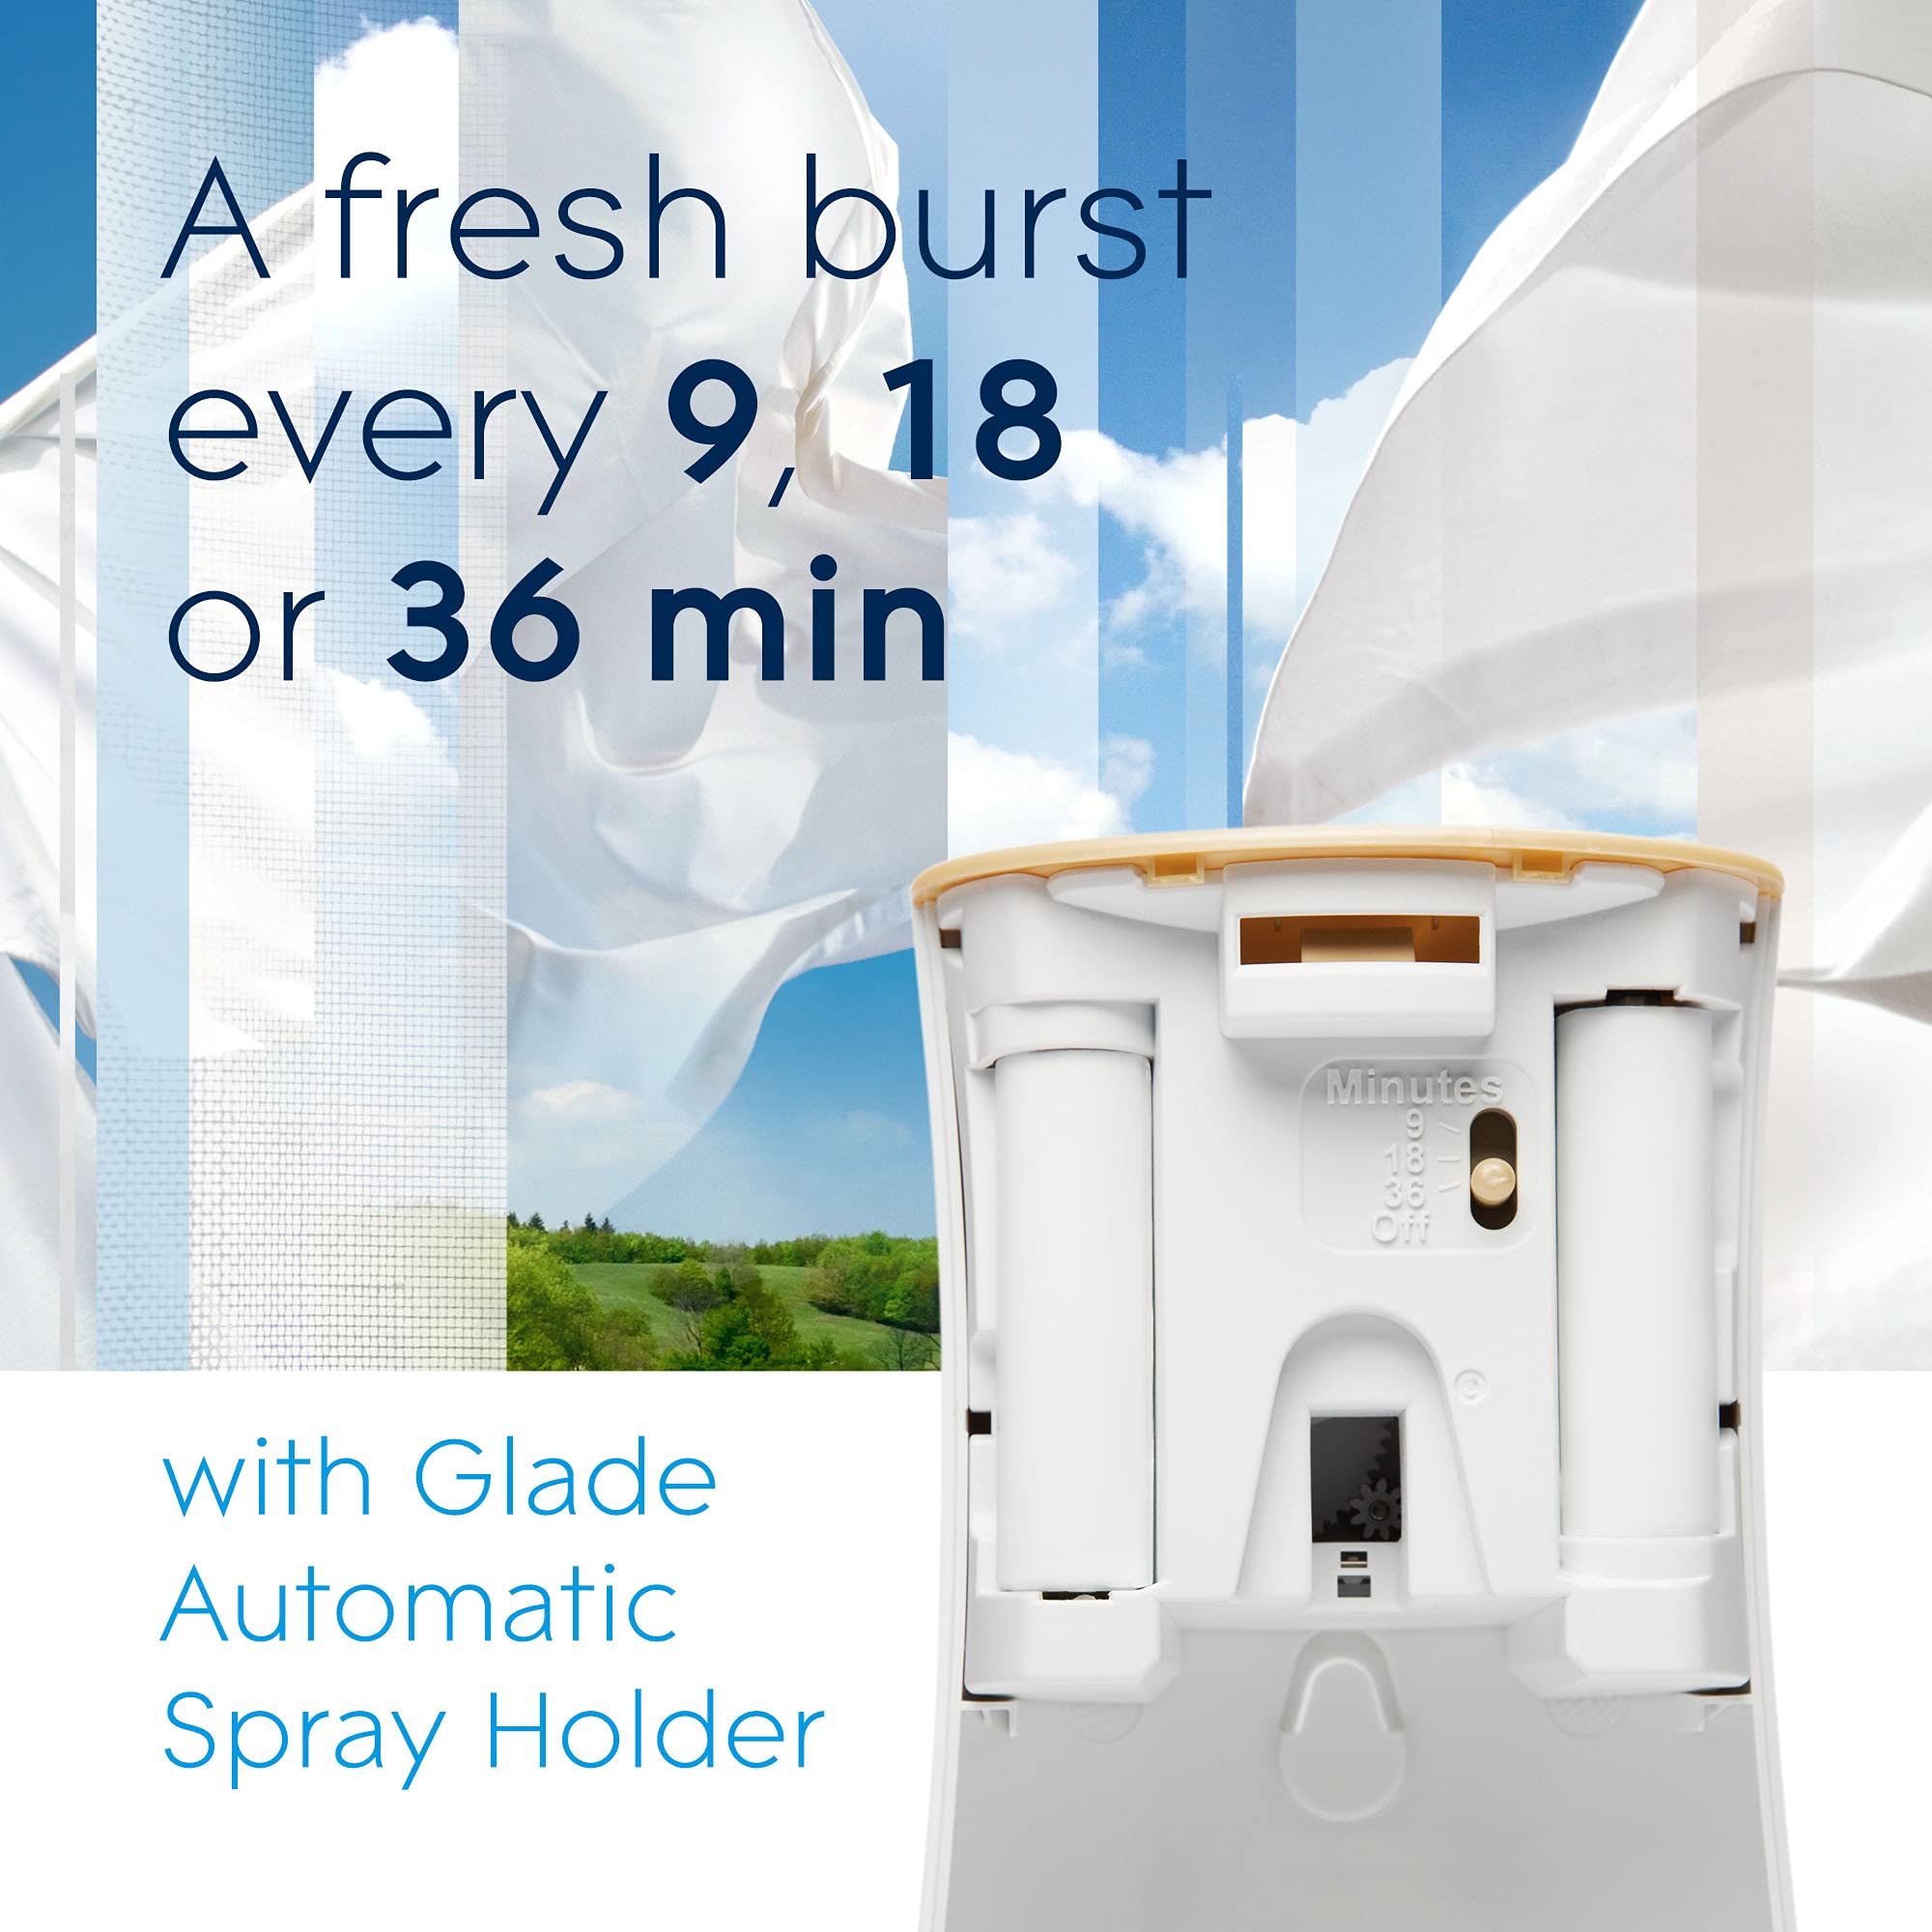 Glade Automatic Spray Refill and Holder Kit, Air Freshener for Home and Bathroom, Clean Linen, 6.2 Oz, 2 Count